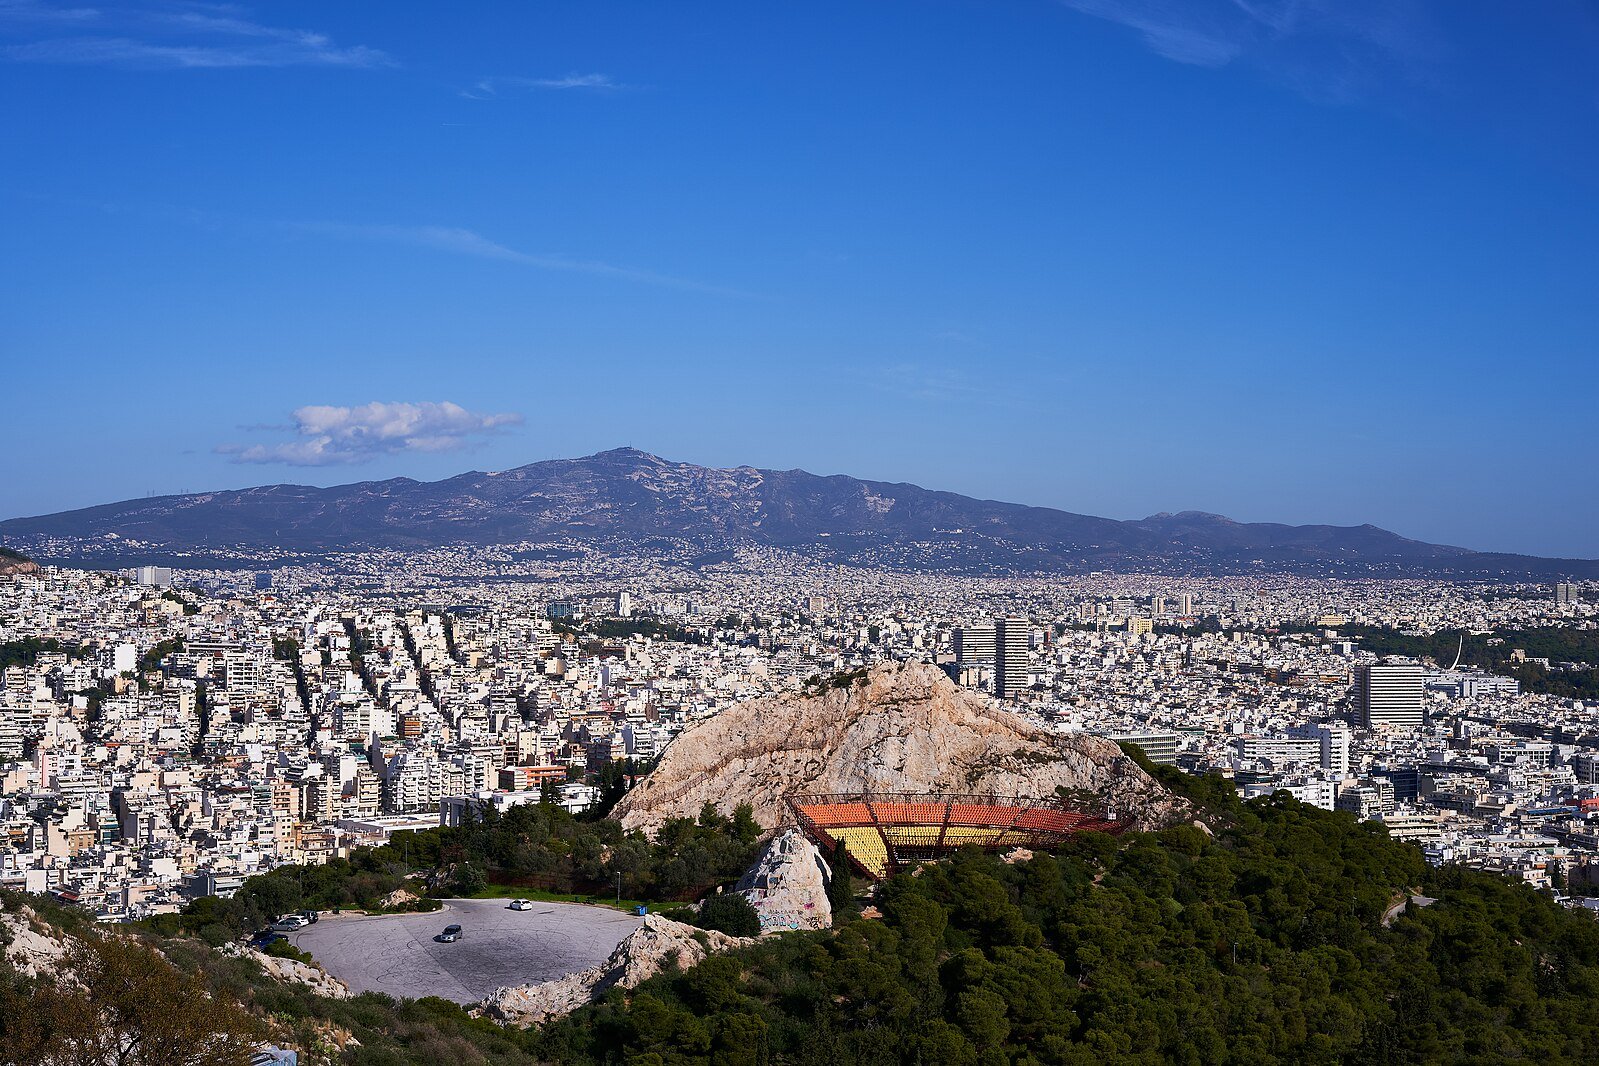 The Lycabettus Theater in Athens